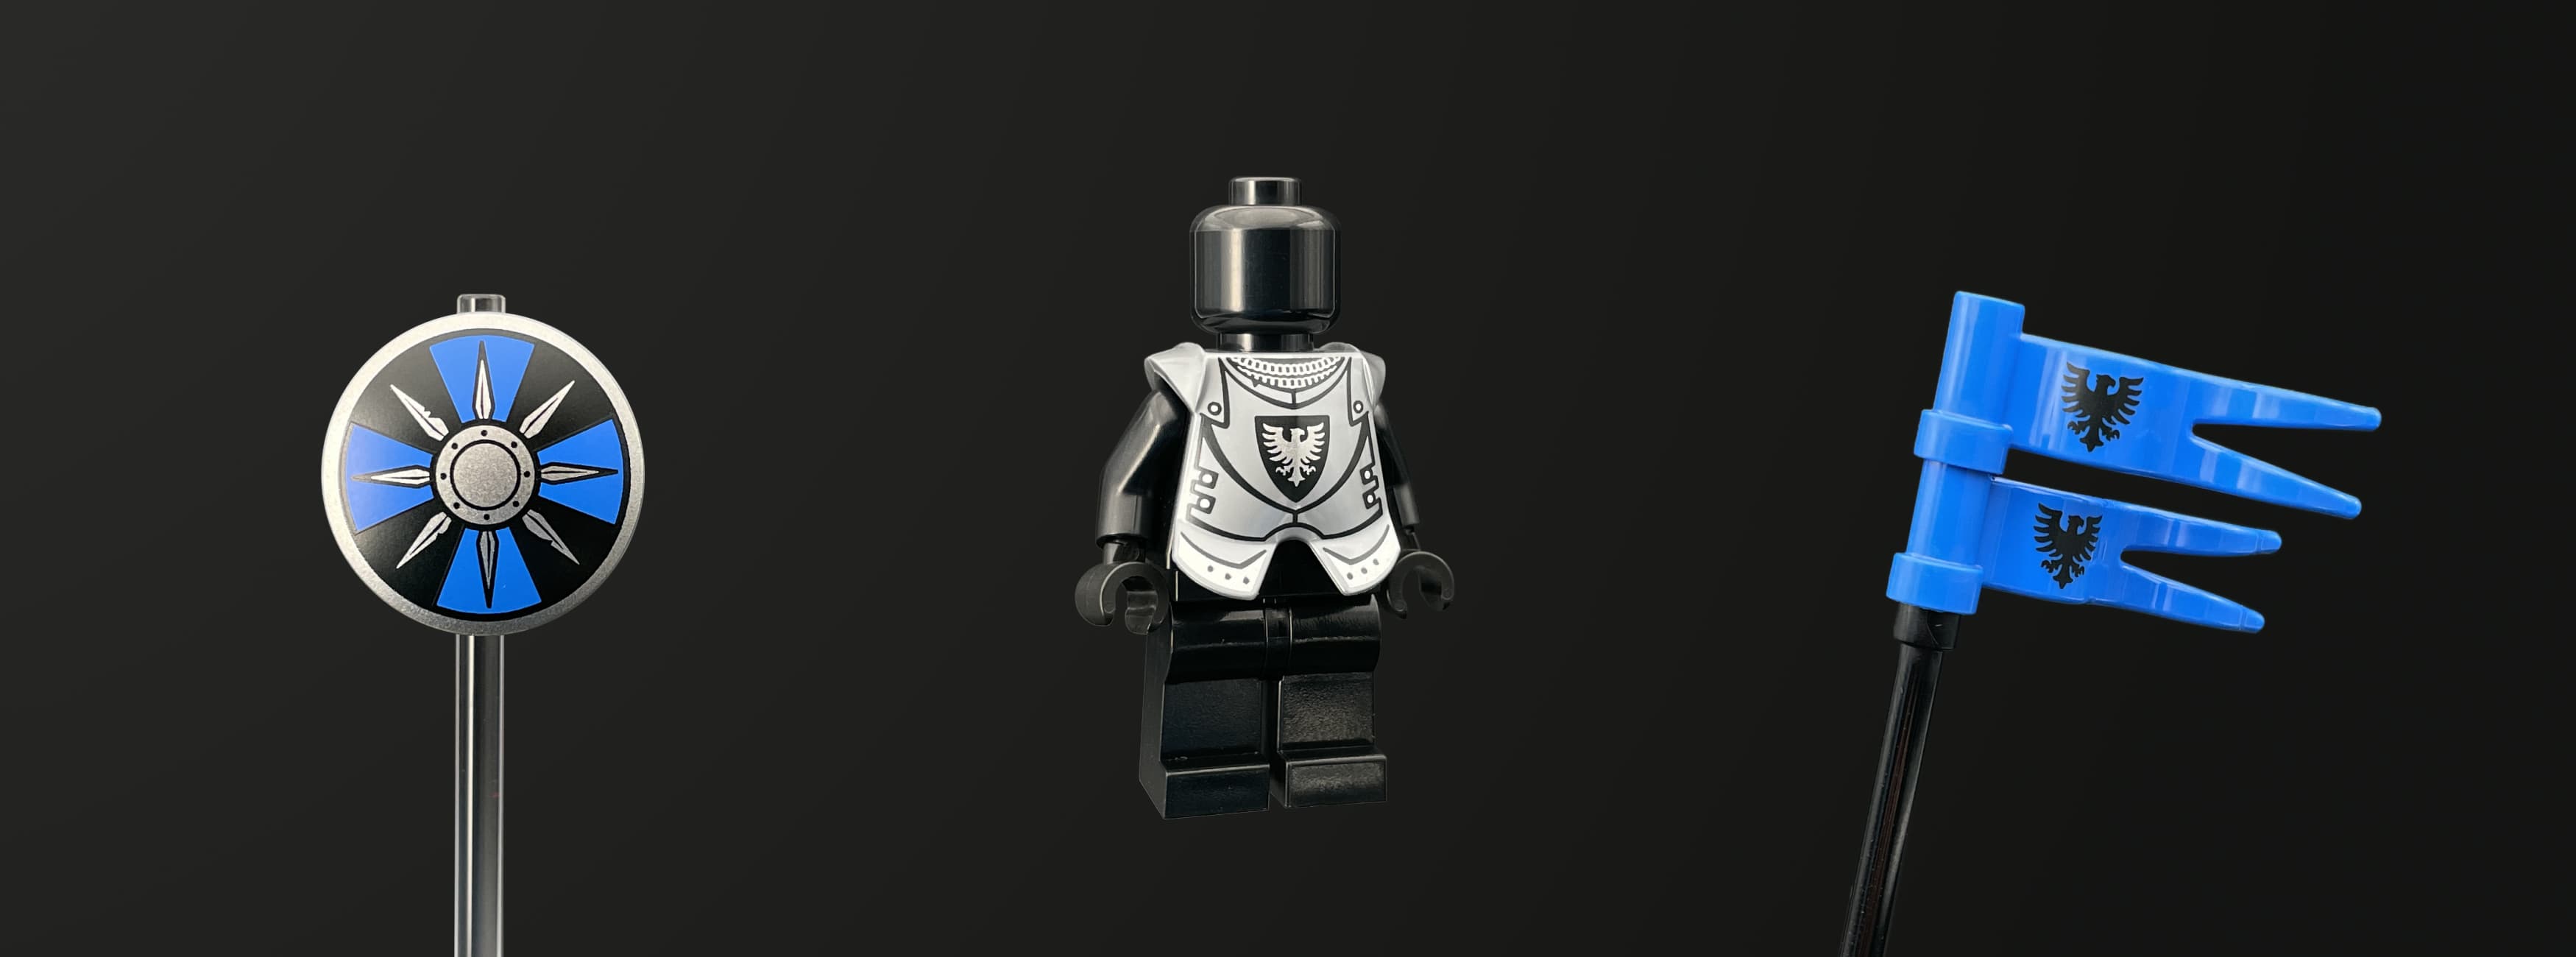 The header image of the onlineshop of Cultbricks custom premium prints. Showing a printed round shield, a printed armor breastplate and printed flags. All in the colors and design of the black falcons.